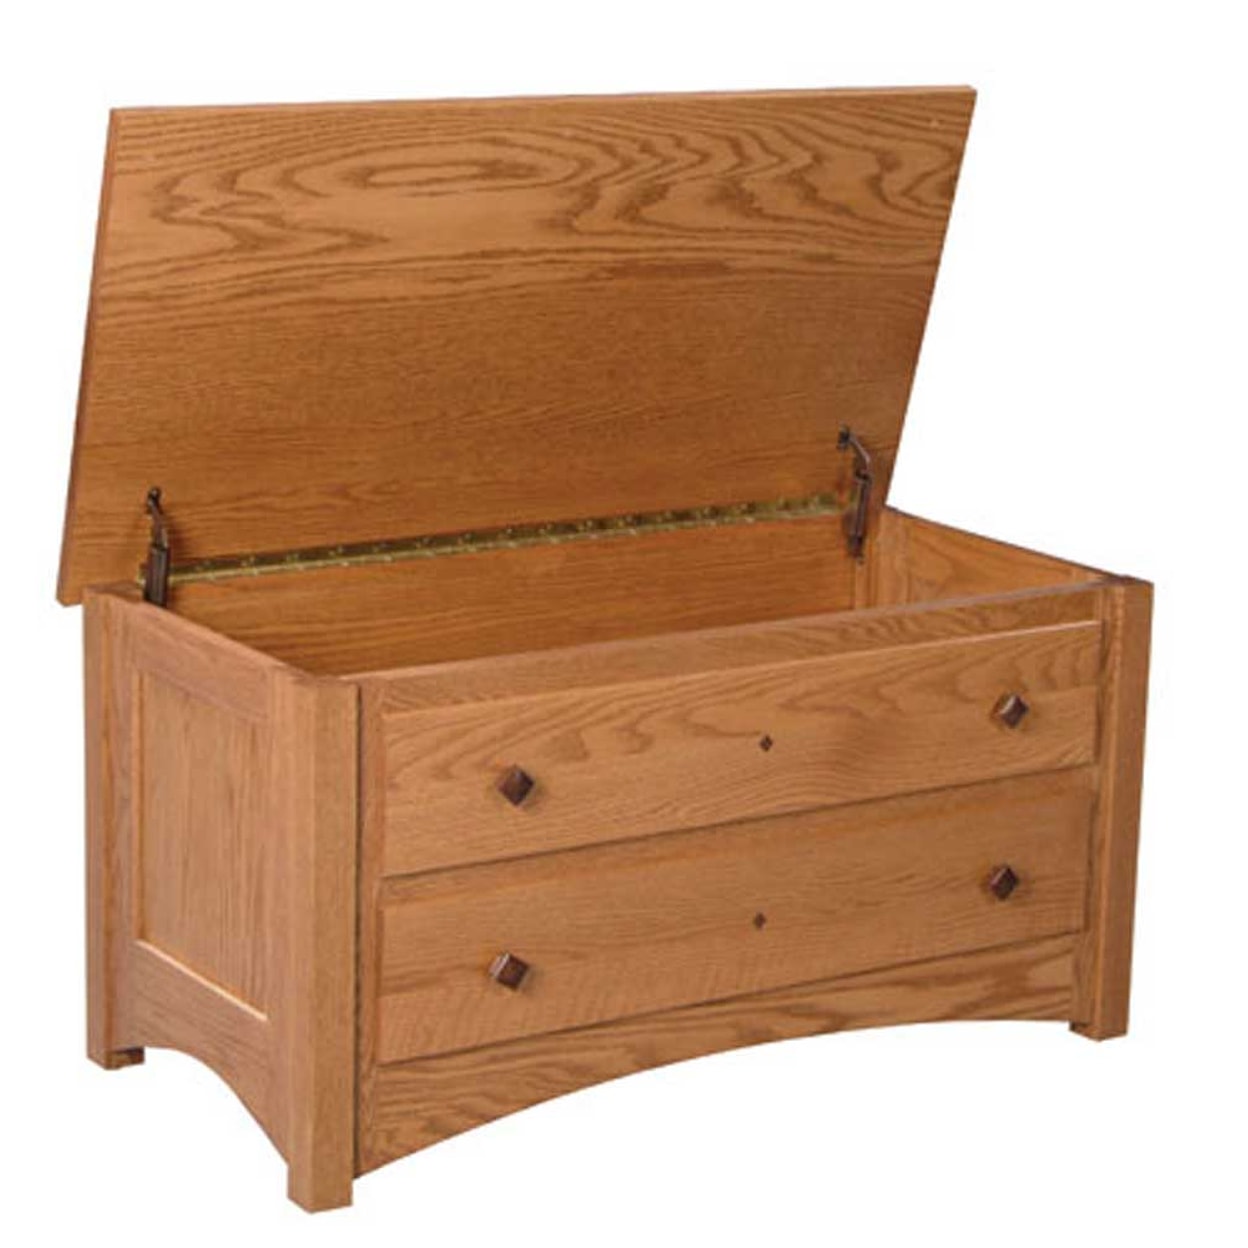 Simply Amish Royal Mission Blanket Chest with False Fronts